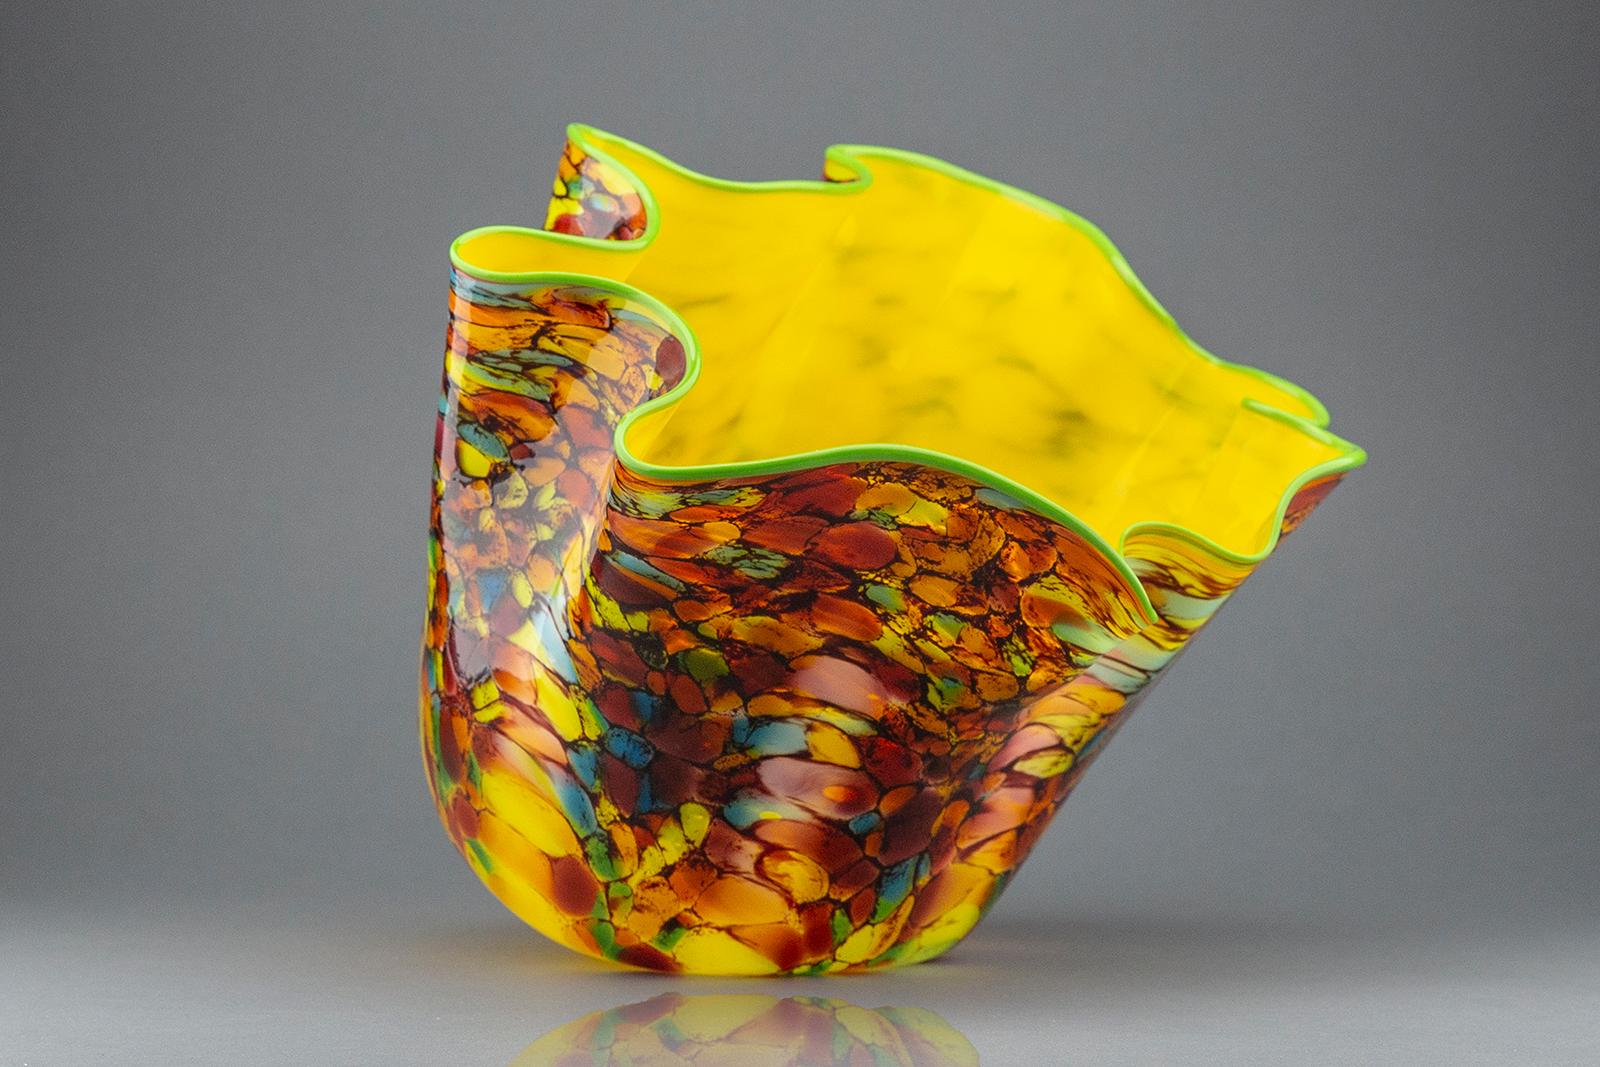 Artist: Dale Chihuly
Title: Carnaval Macchia large vase with Yellow Interior
Medium: Handblown glass vase
Size: Measures 9.5